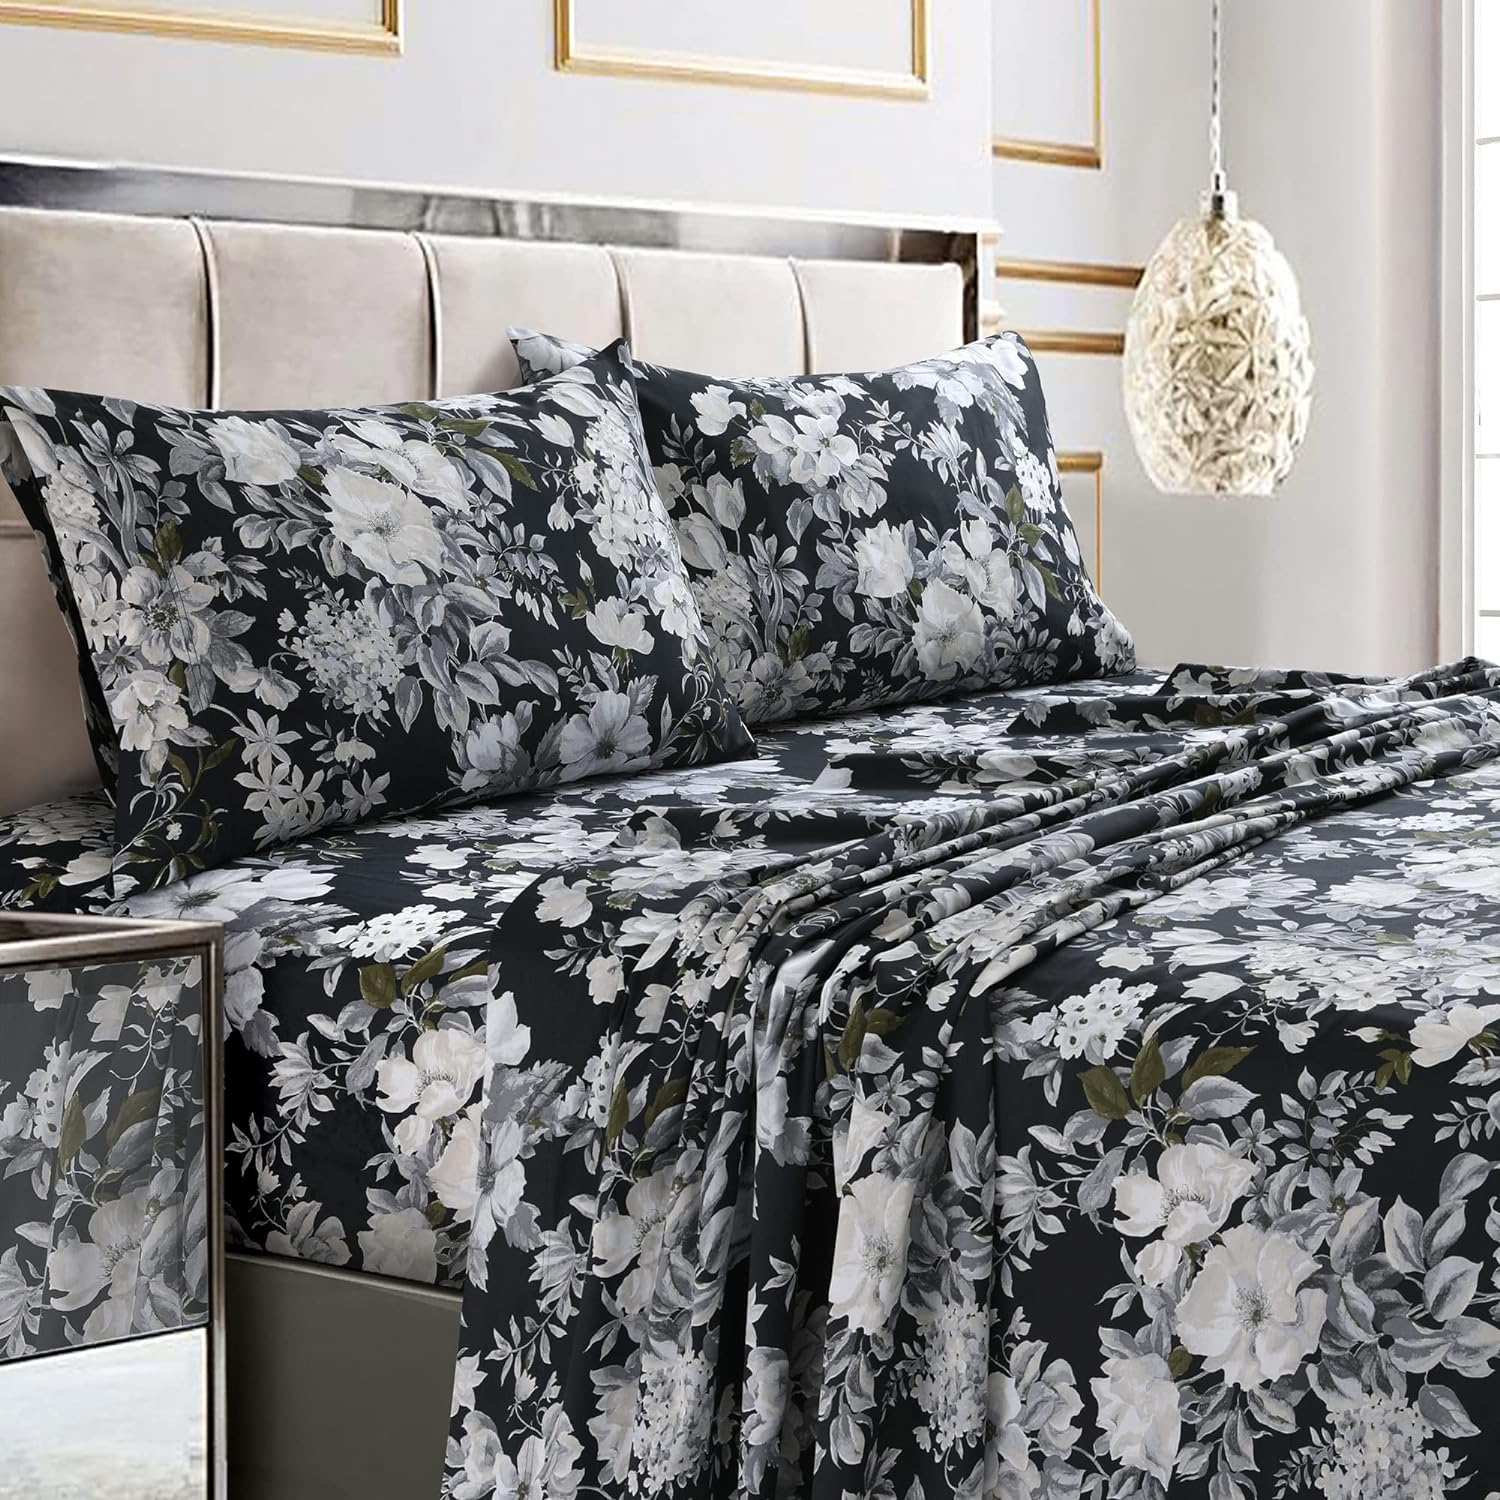 Tribeca Living Queen Bed Sheet Set, Soft Cotton Sateen Printed Sheets Floral Print, Extra Deep Pocket, 300 Thread Count, 4-Piece Bedding Sets, Vernazza Charcoal/Multi, (VERN4PSSQUCG)